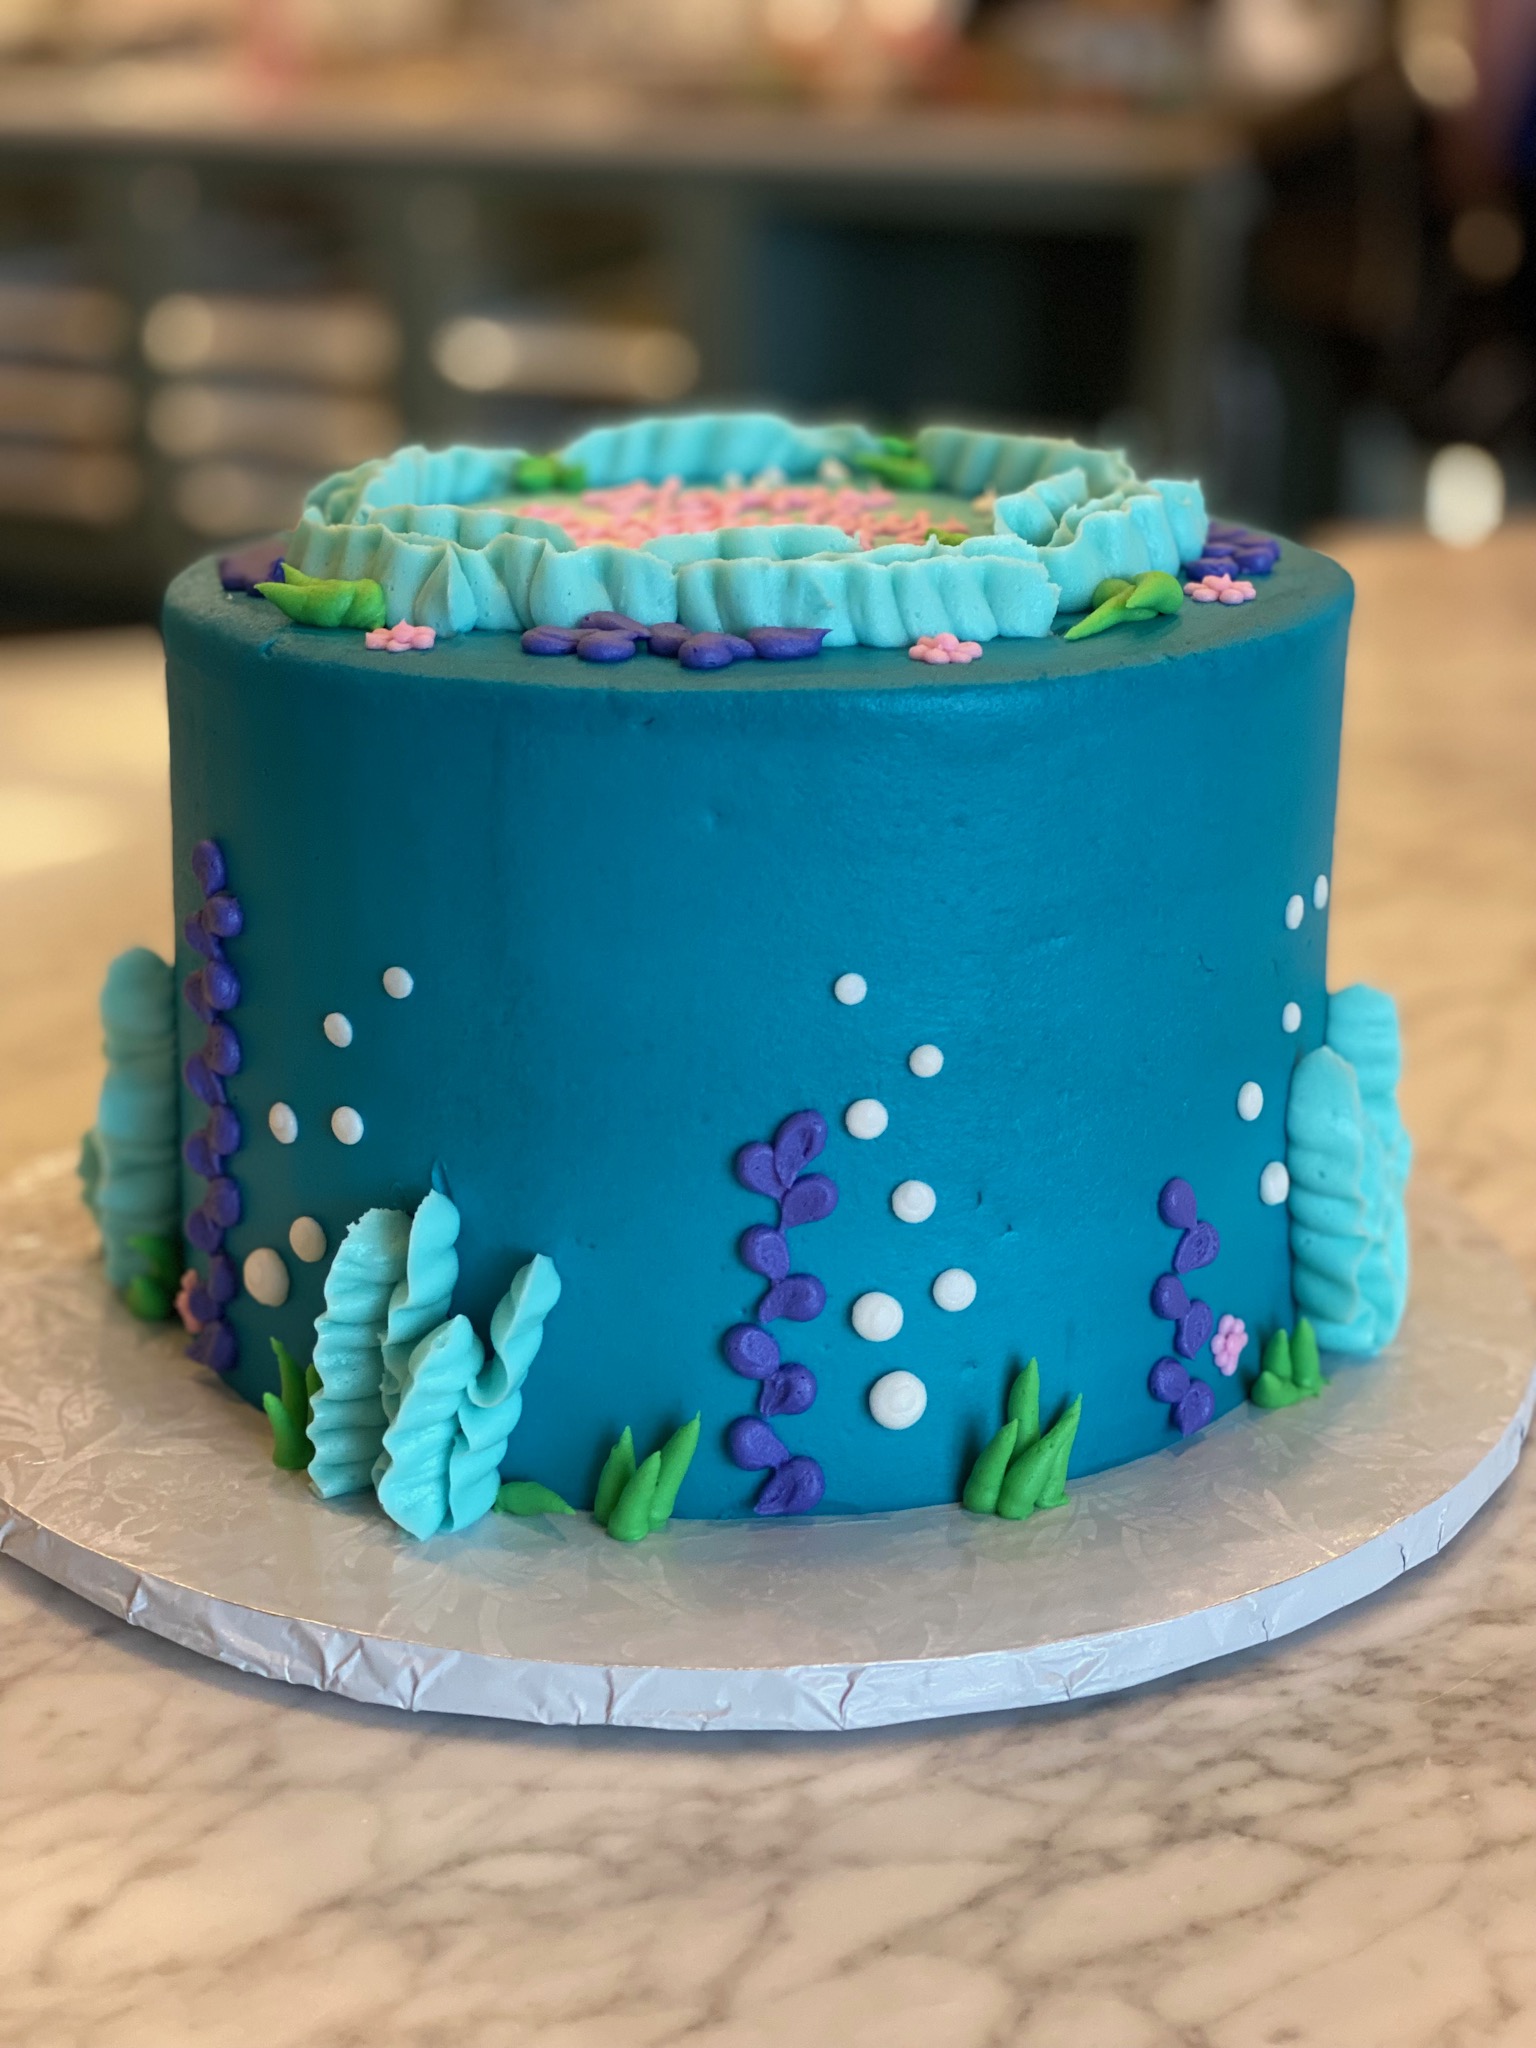 Ocean blue round birthday cake decorated with seabed vegetation in green, light blue and purple colors. The design shows bubbles rising towards the surface in white piped icing.